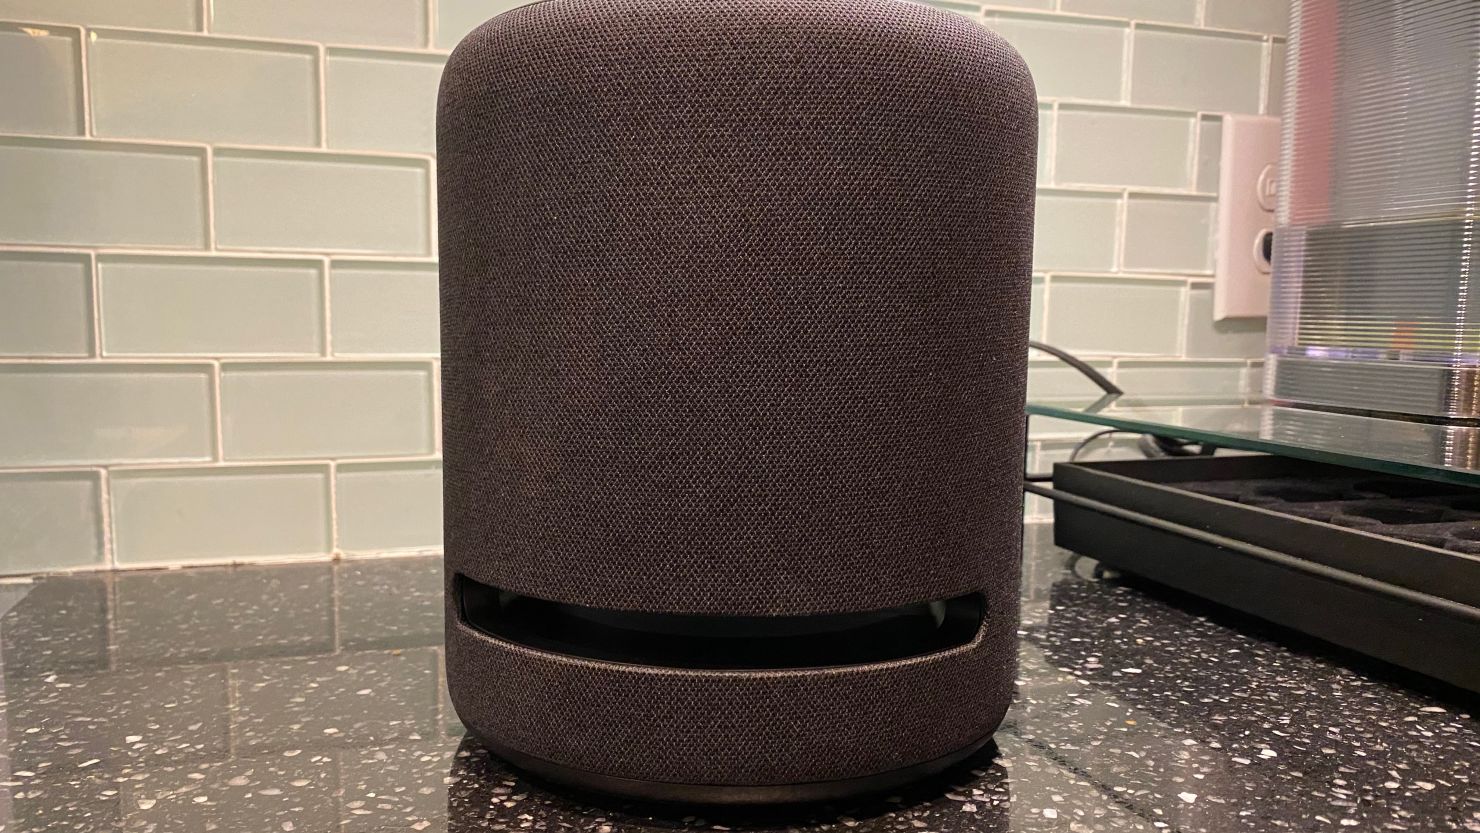 Echo subwoofer and Alexa-capable smart plug may be on the way